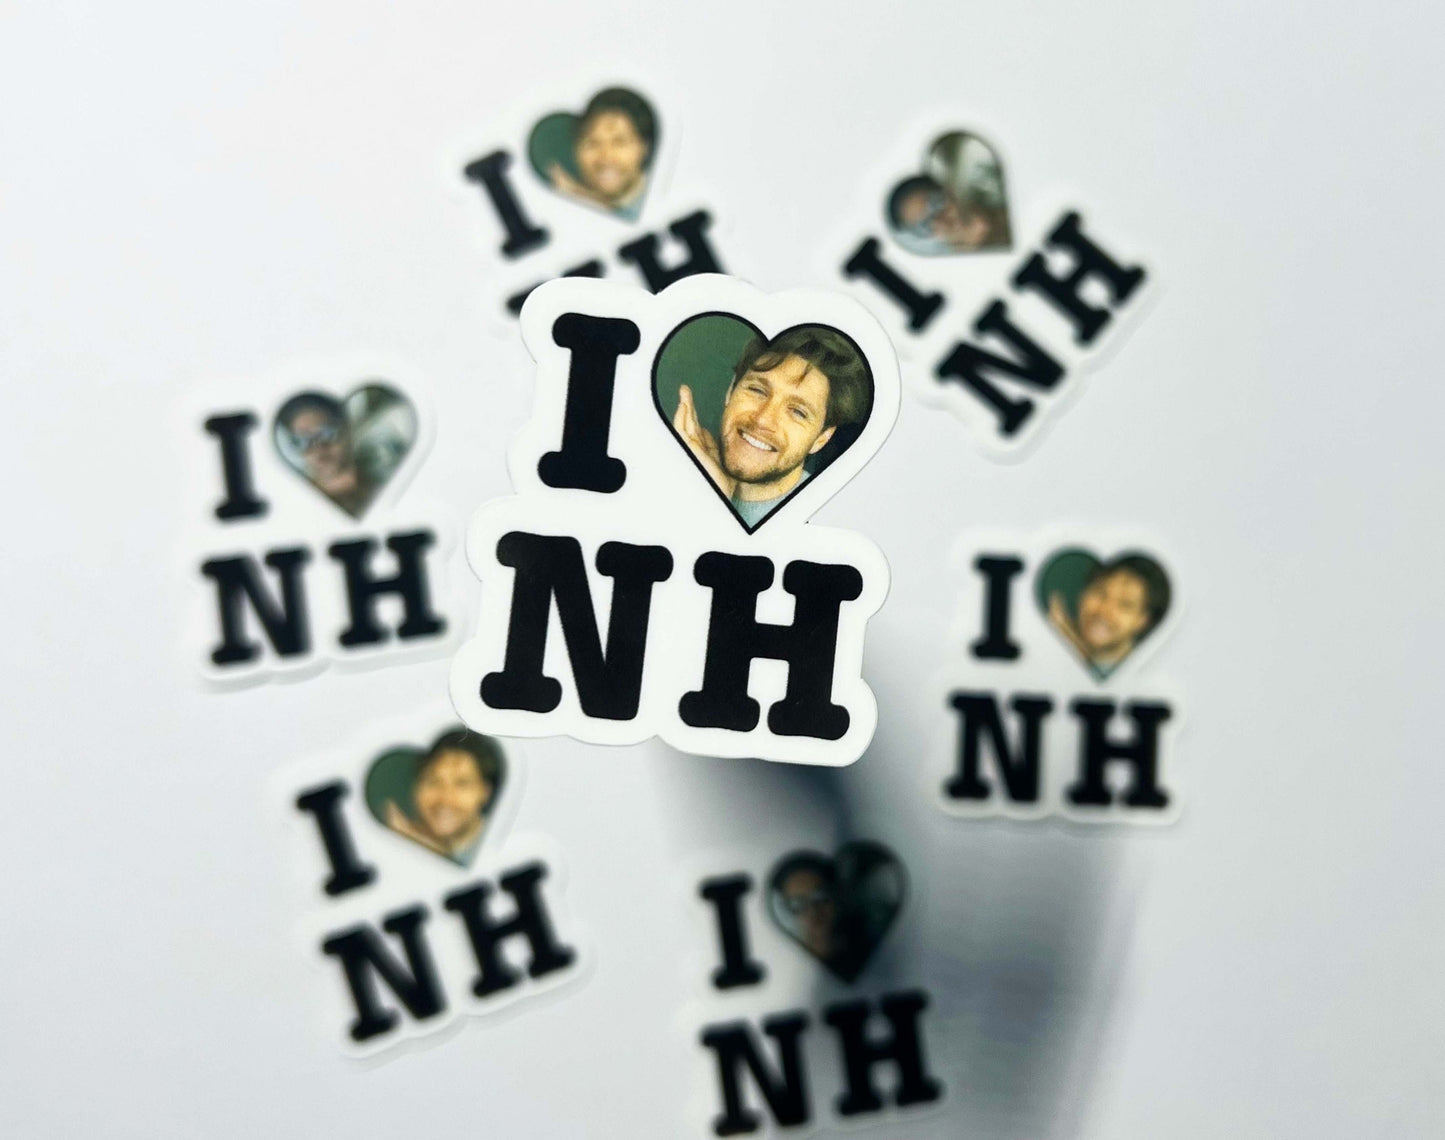 I Heart Harry, Taylor, Niall, Louis and 1D Photo Stickers